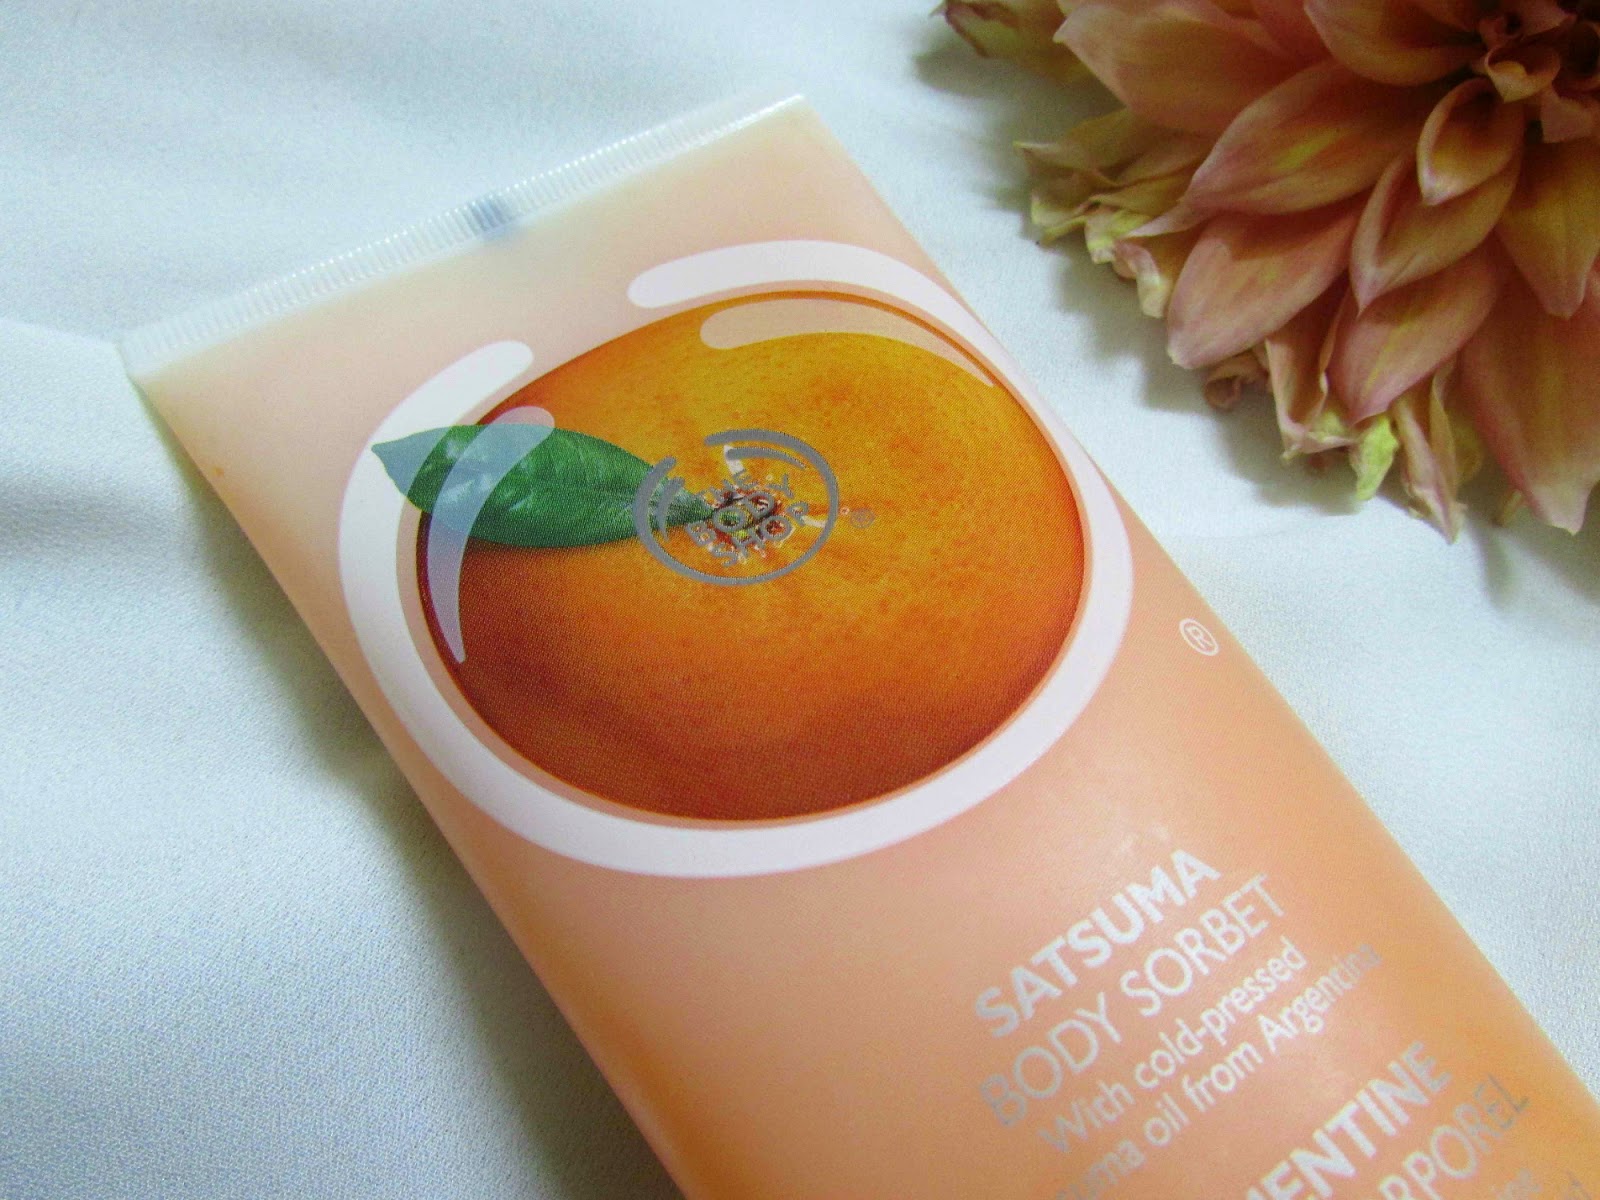 The Body Shop Summer Refreshment Sorbet review price India, sorbet body lotion, Summer must have bosy lotion, cooling body lotion for summers,cool and fresh summer products, body shop india, beauty , fashion,beauty and fashion,beauty blog, fashion blog , indian beauty blog,indian fashion blog, beauty and fashion blog, indian beauty and fashion blog, indian bloggers, indian beauty bloggers, indian fashion bloggers,indian bloggers online, top 10 indian bloggers, top indian bloggers,top 10 fashion bloggers, indian bloggers on blogspot,home remedies, how to